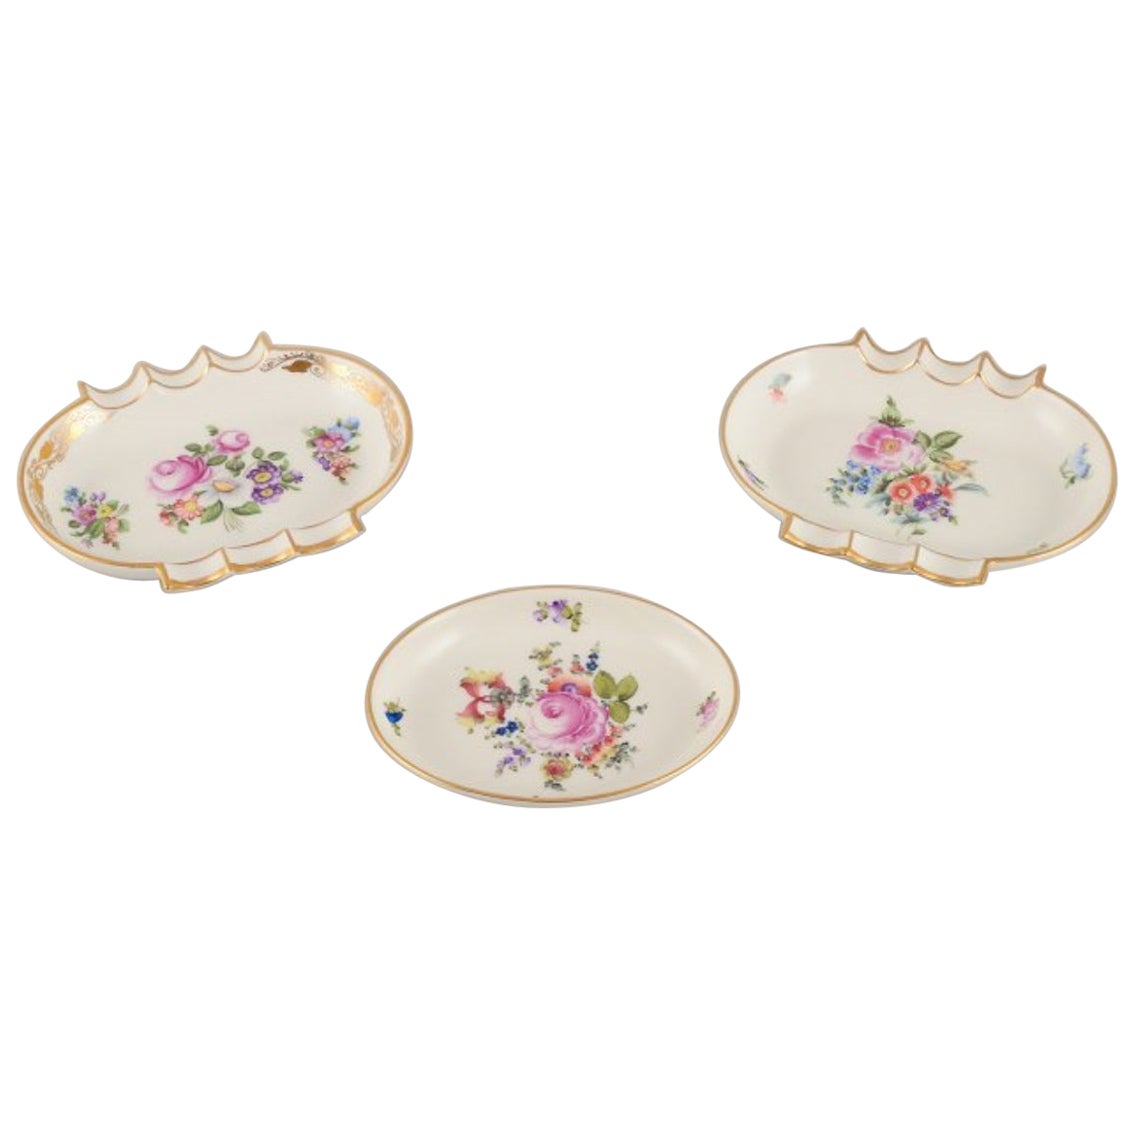 Herend, Hungary. Three small oval bowls hand-painted with flower motifs. For Sale